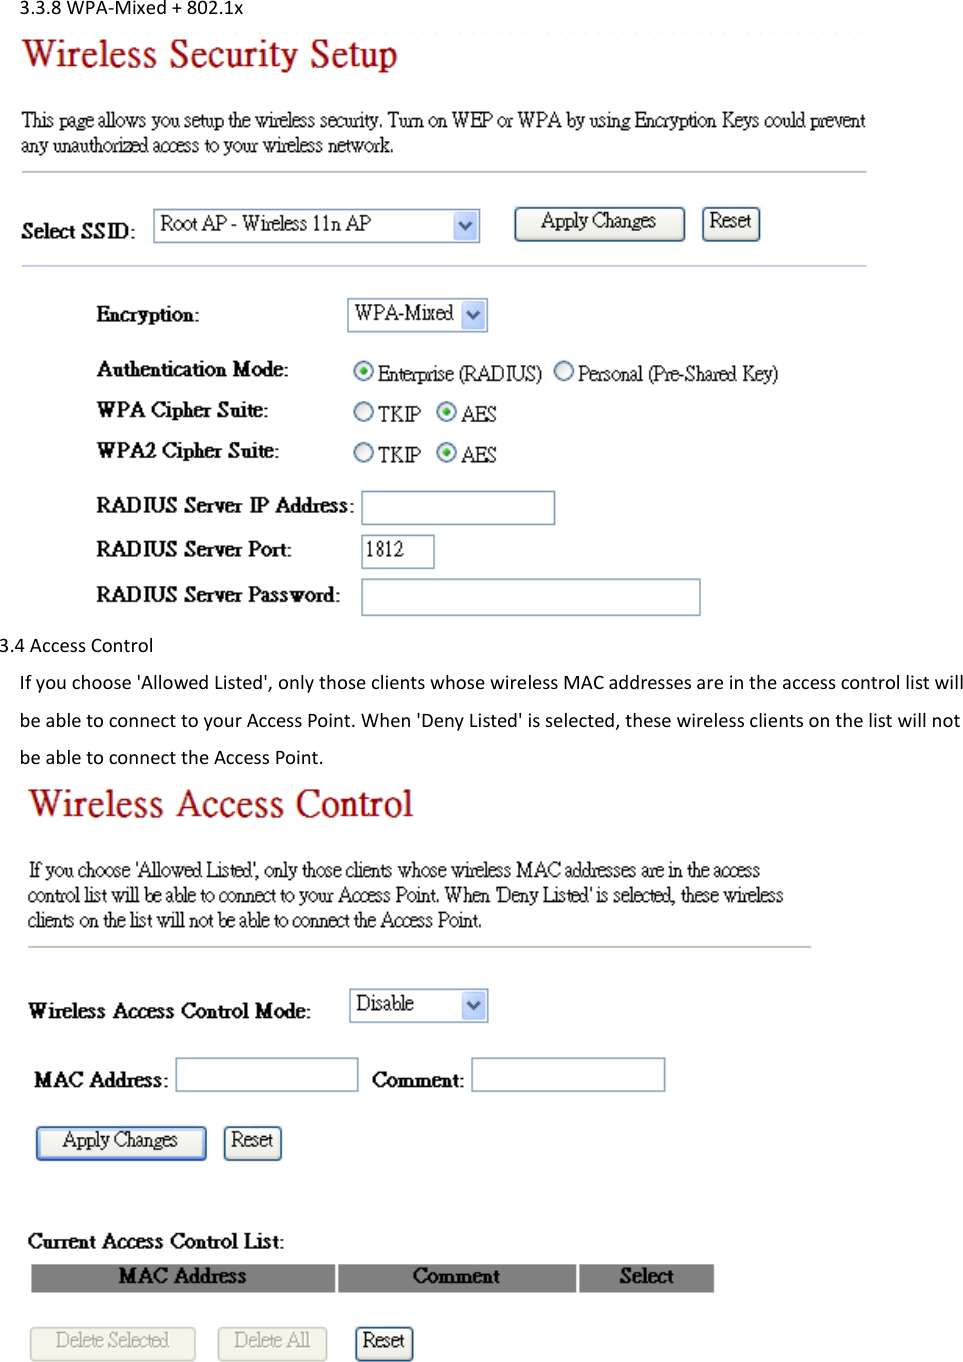 3.3.8 WPA-Mixed + 802.1x      3.4 Access Control If you choose &apos;Allowed Listed&apos;, only those clients whose wireless MAC addresses are in the access control list will be able to connect to your Access Point. When &apos;Deny Listed&apos; is selected, these wireless clients on the list will not be able to connect the Access Point.       